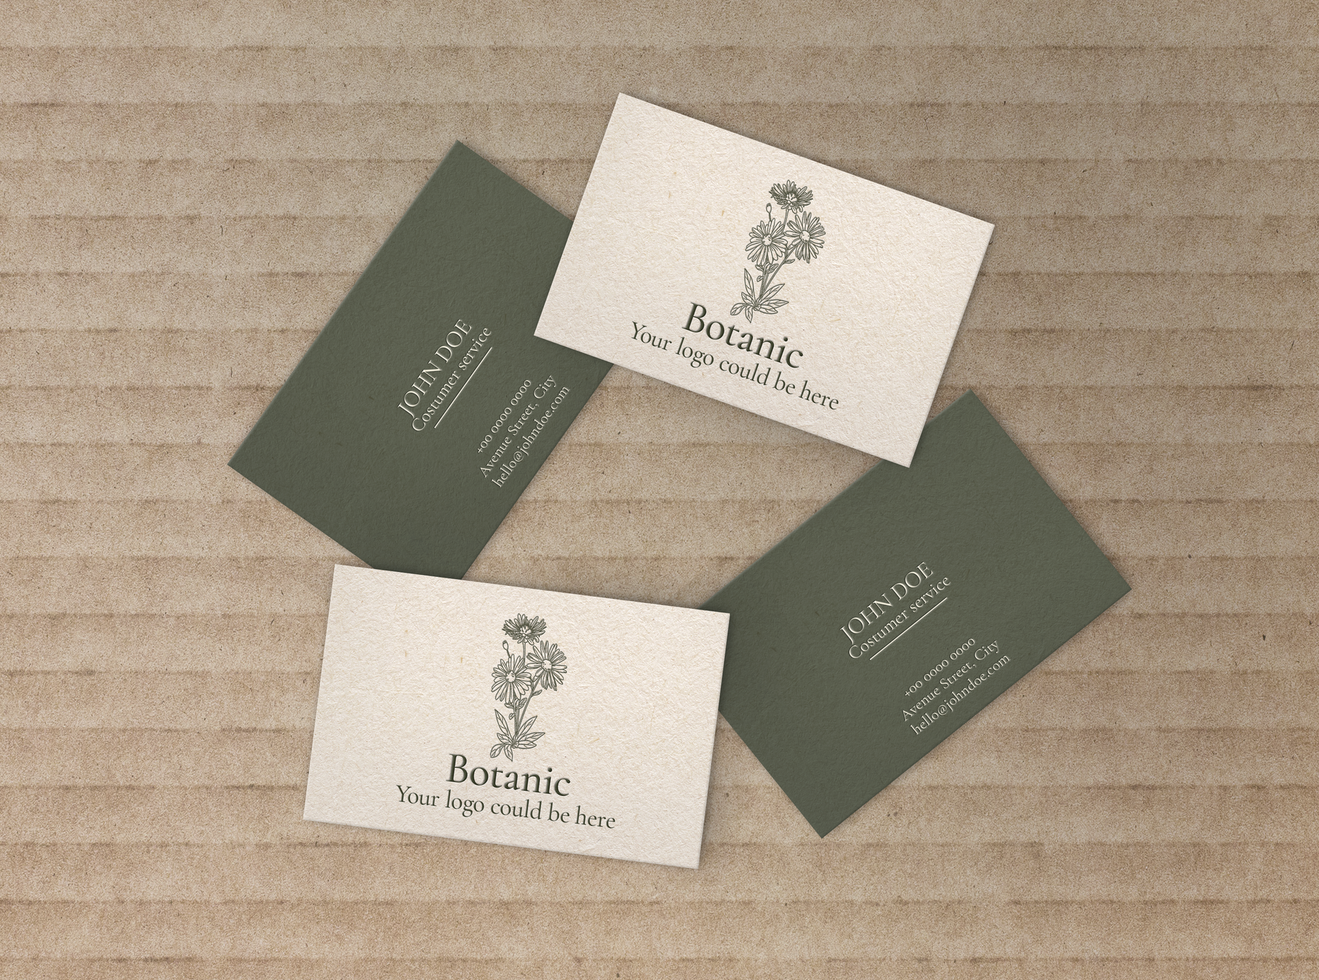 Mockup of Business Cards Set Made out of Recycled Paper psd